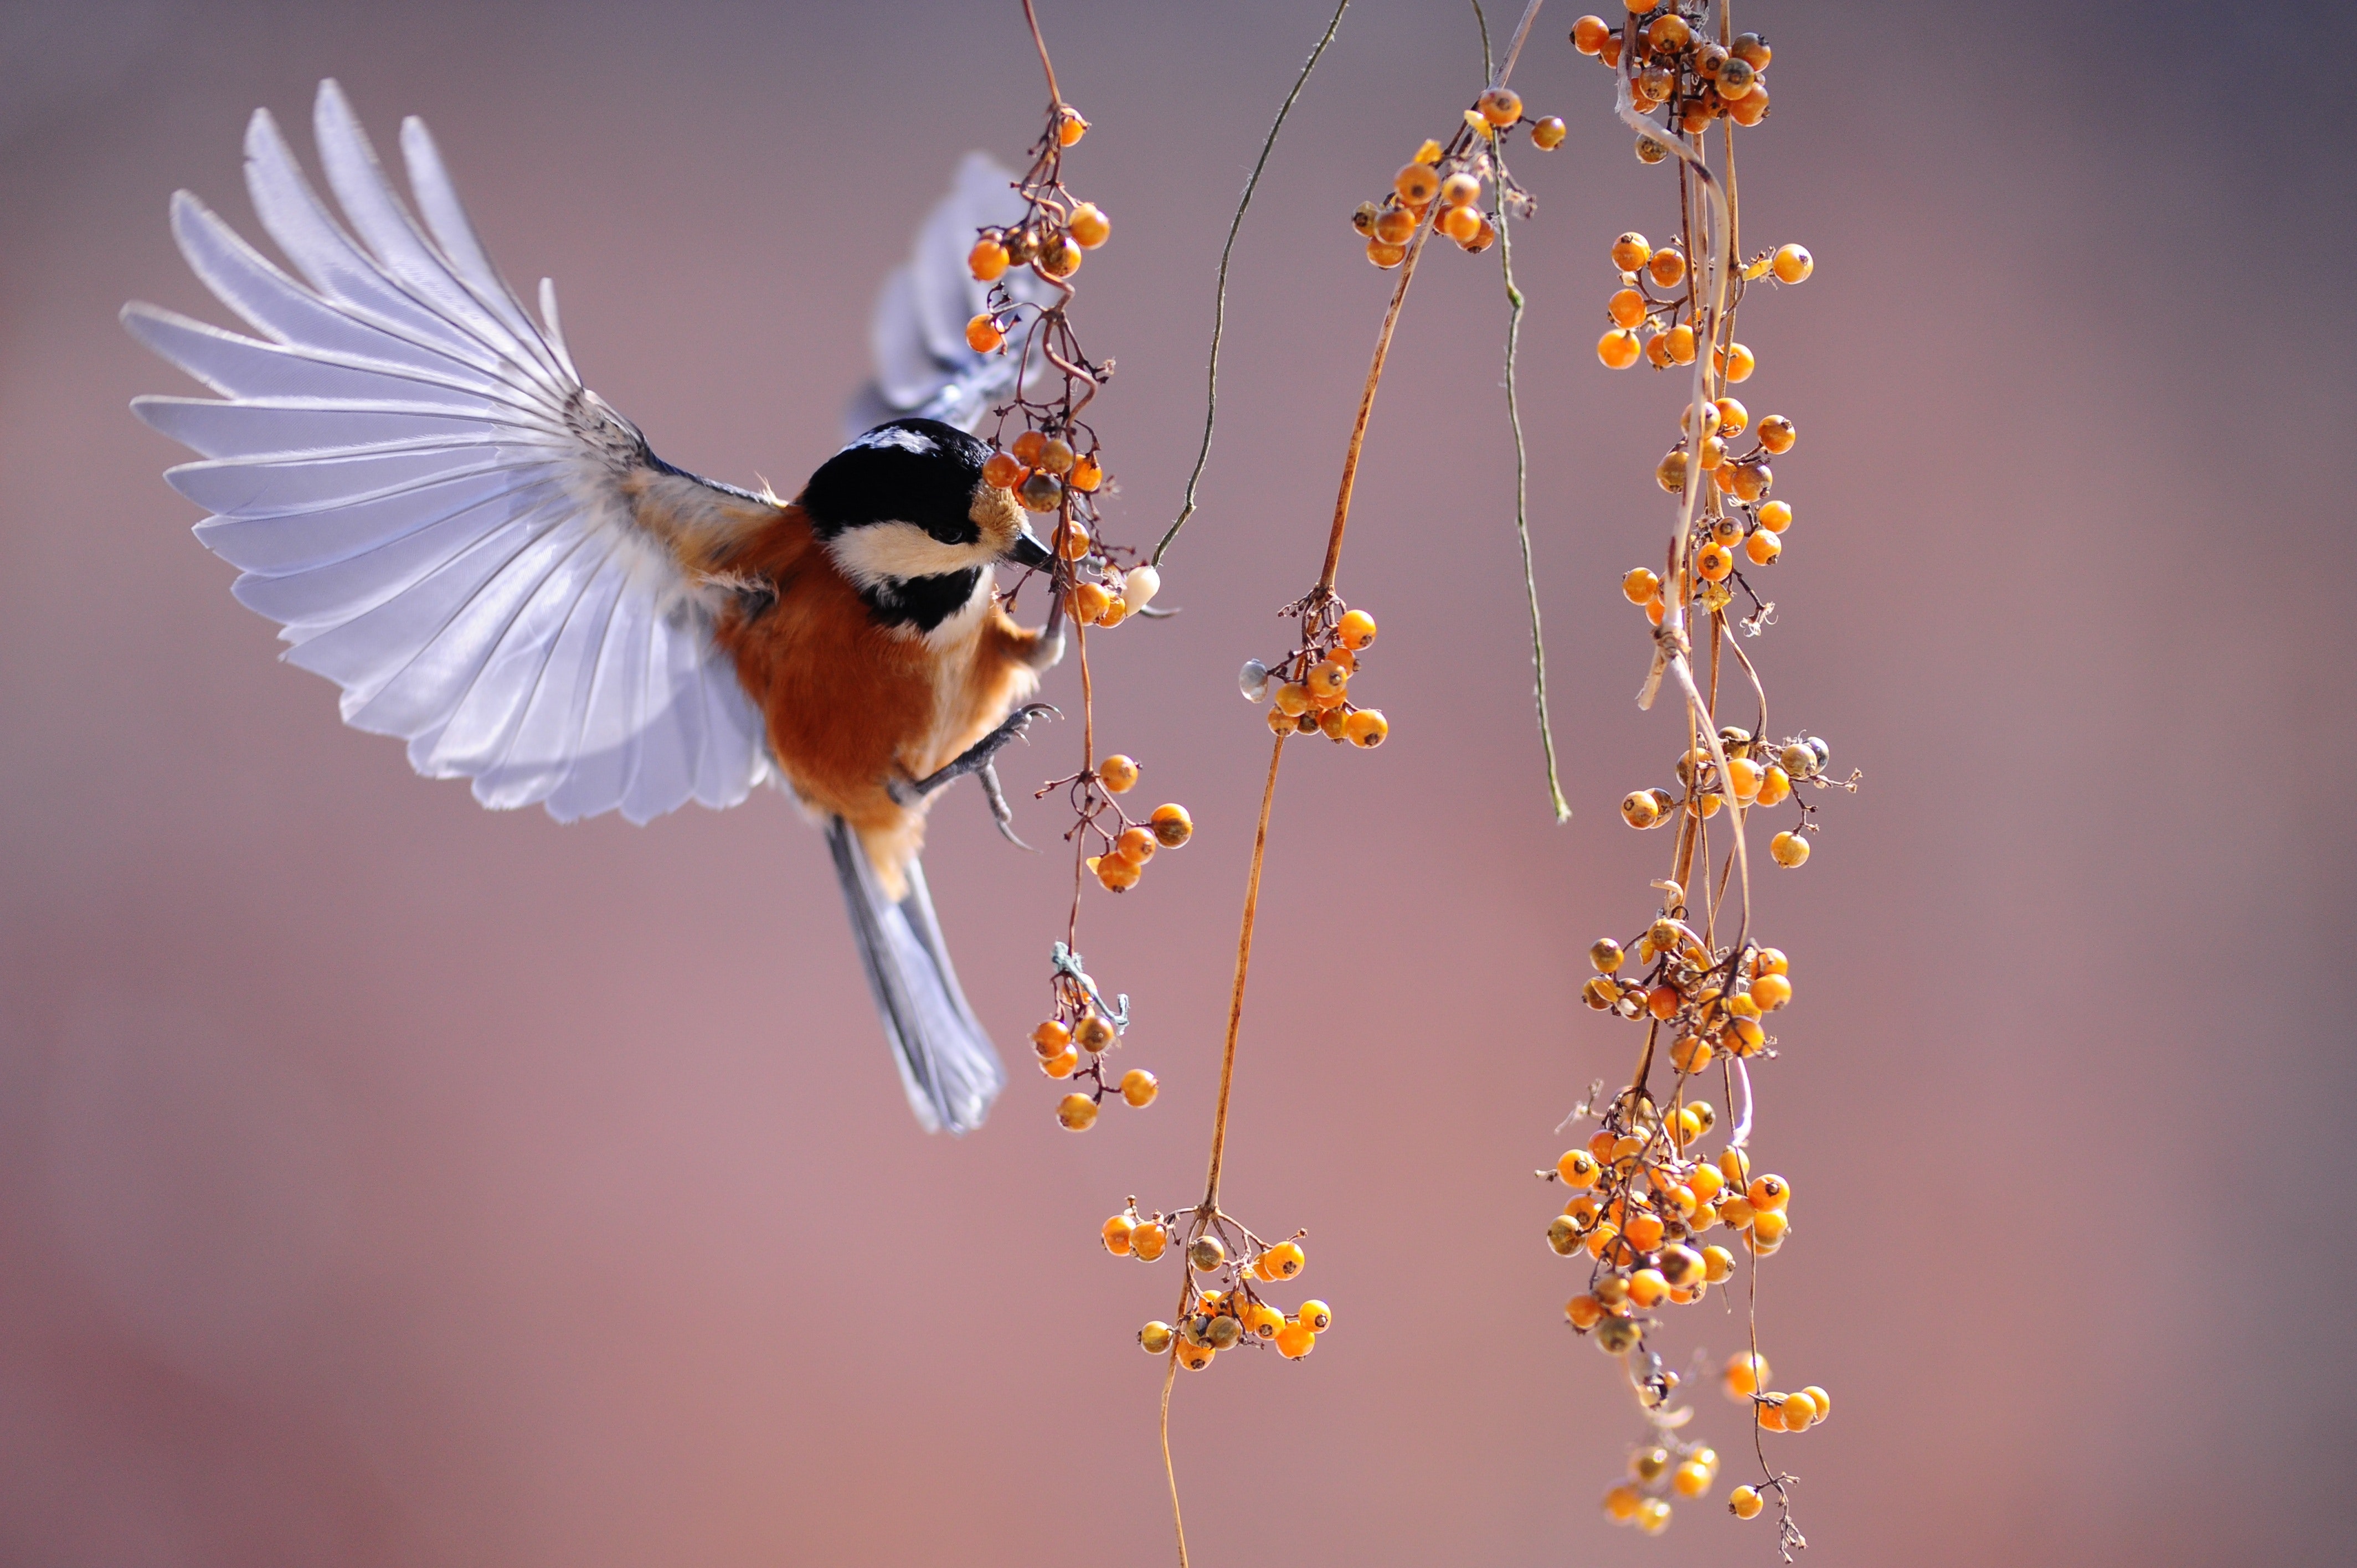 Wallpapers with animals and birds –